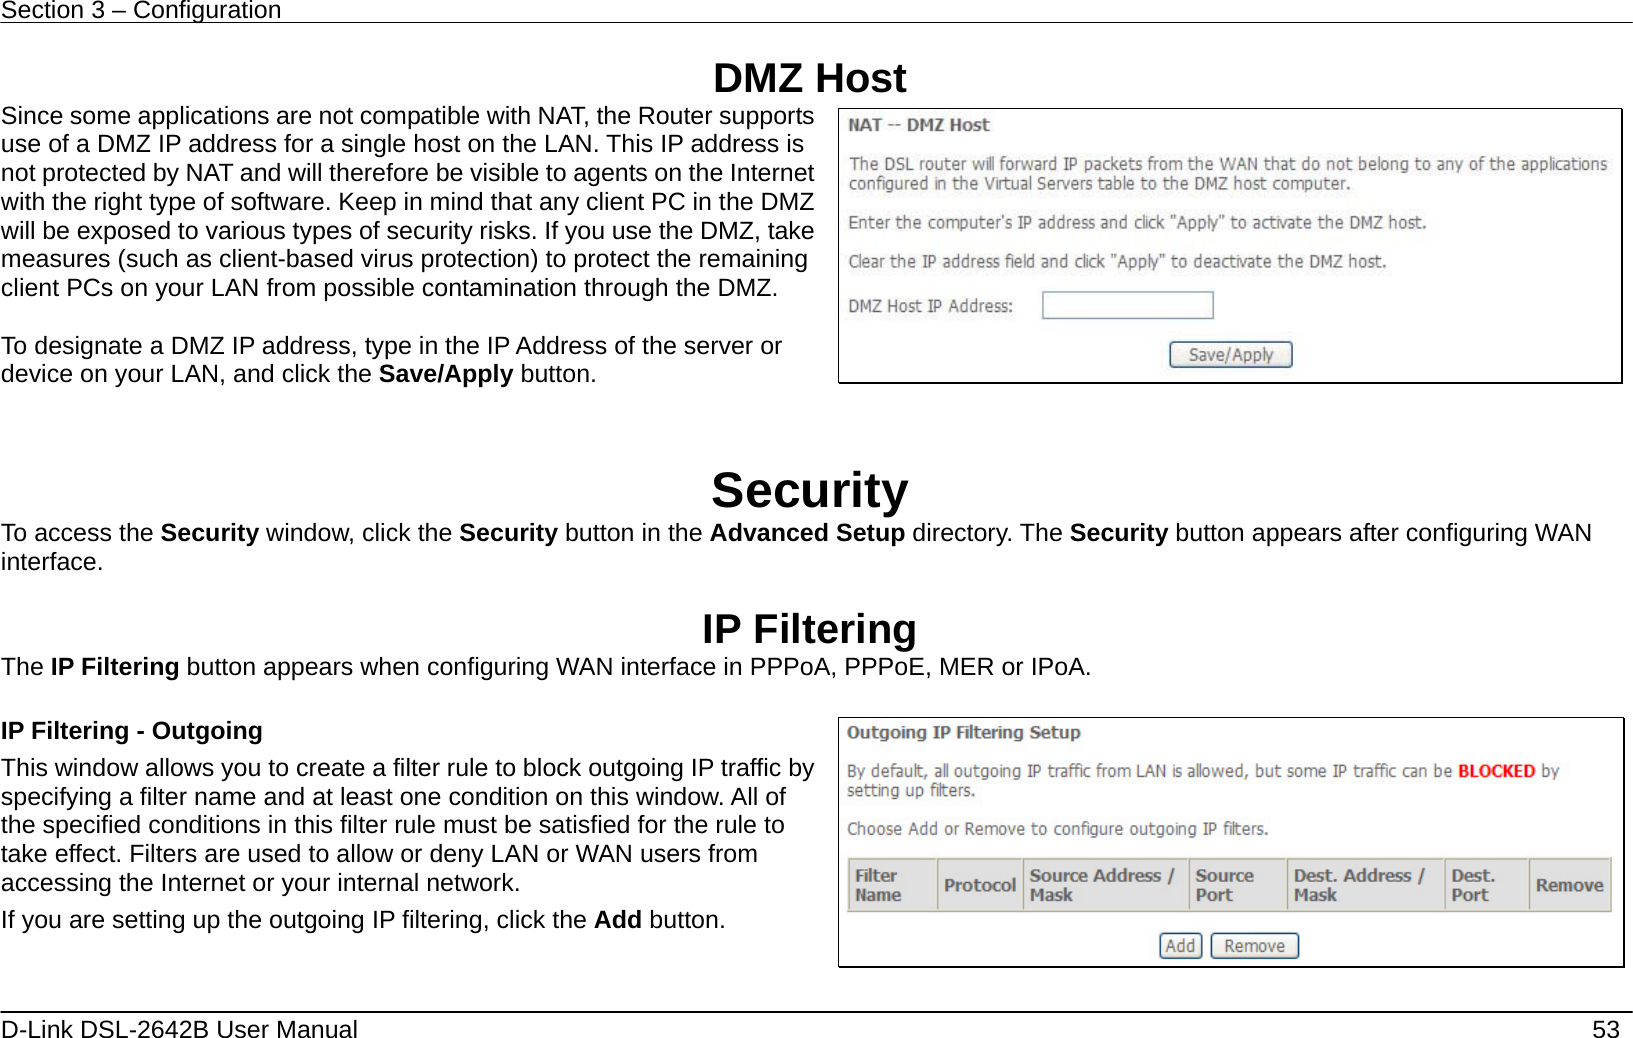 Section 3 – Configuration   D-Link DSL-2642B User Manual    53 DMZ Host Since some applications are not compatible with NAT, the Router supports use of a DMZ IP address for a single host on the LAN. This IP address is not protected by NAT and will therefore be visible to agents on the Internet with the right type of software. Keep in mind that any client PC in the DMZ will be exposed to various types of security risks. If you use the DMZ, take measures (such as client-based virus protection) to protect the remaining client PCs on your LAN from possible contamination through the DMZ.  To designate a DMZ IP address, type in the IP Address of the server or device on your LAN, and click the Save/Apply button.    Security To access the Security window, click the Security button in the Advanced Setup directory. The Security button appears after configuring WAN interface.  IP Filtering The IP Filtering button appears when configuring WAN interface in PPPoA, PPPoE, MER or IPoA.  IP Filtering - Outgoing This window allows you to create a filter rule to block outgoing IP traffic by specifying a filter name and at least one condition on this window. All of the specified conditions in this filter rule must be satisfied for the rule to take effect. Filters are used to allow or deny LAN or WAN users from accessing the Internet or your internal network. If you are setting up the outgoing IP filtering, click the Add button.       